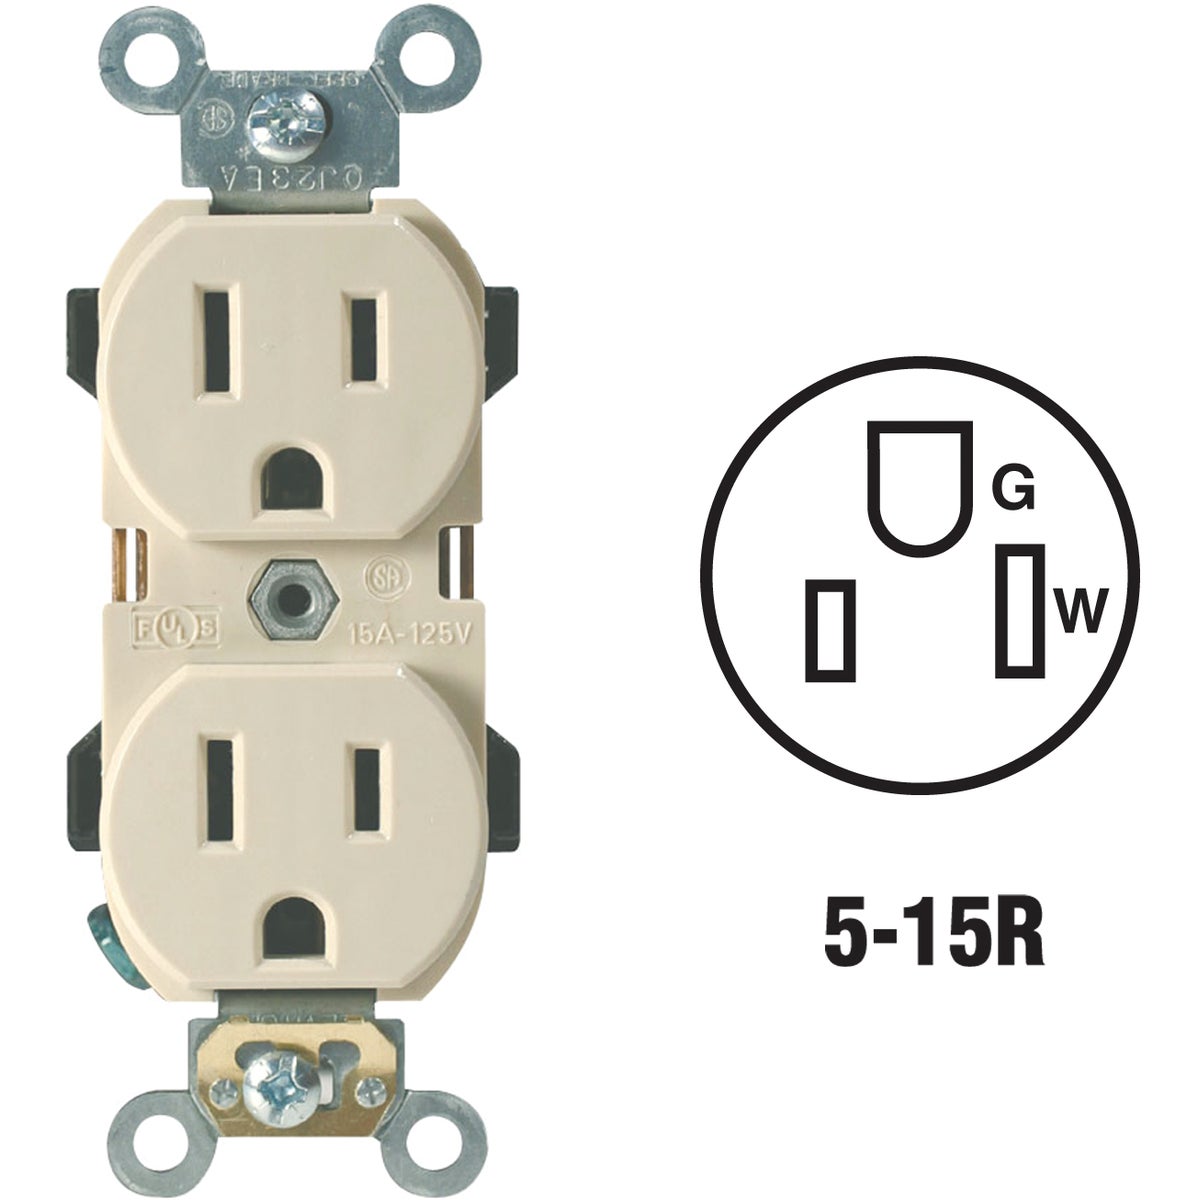 Item 519030, Industrial Specification Grade duplex outlet featuring a nylon face and 